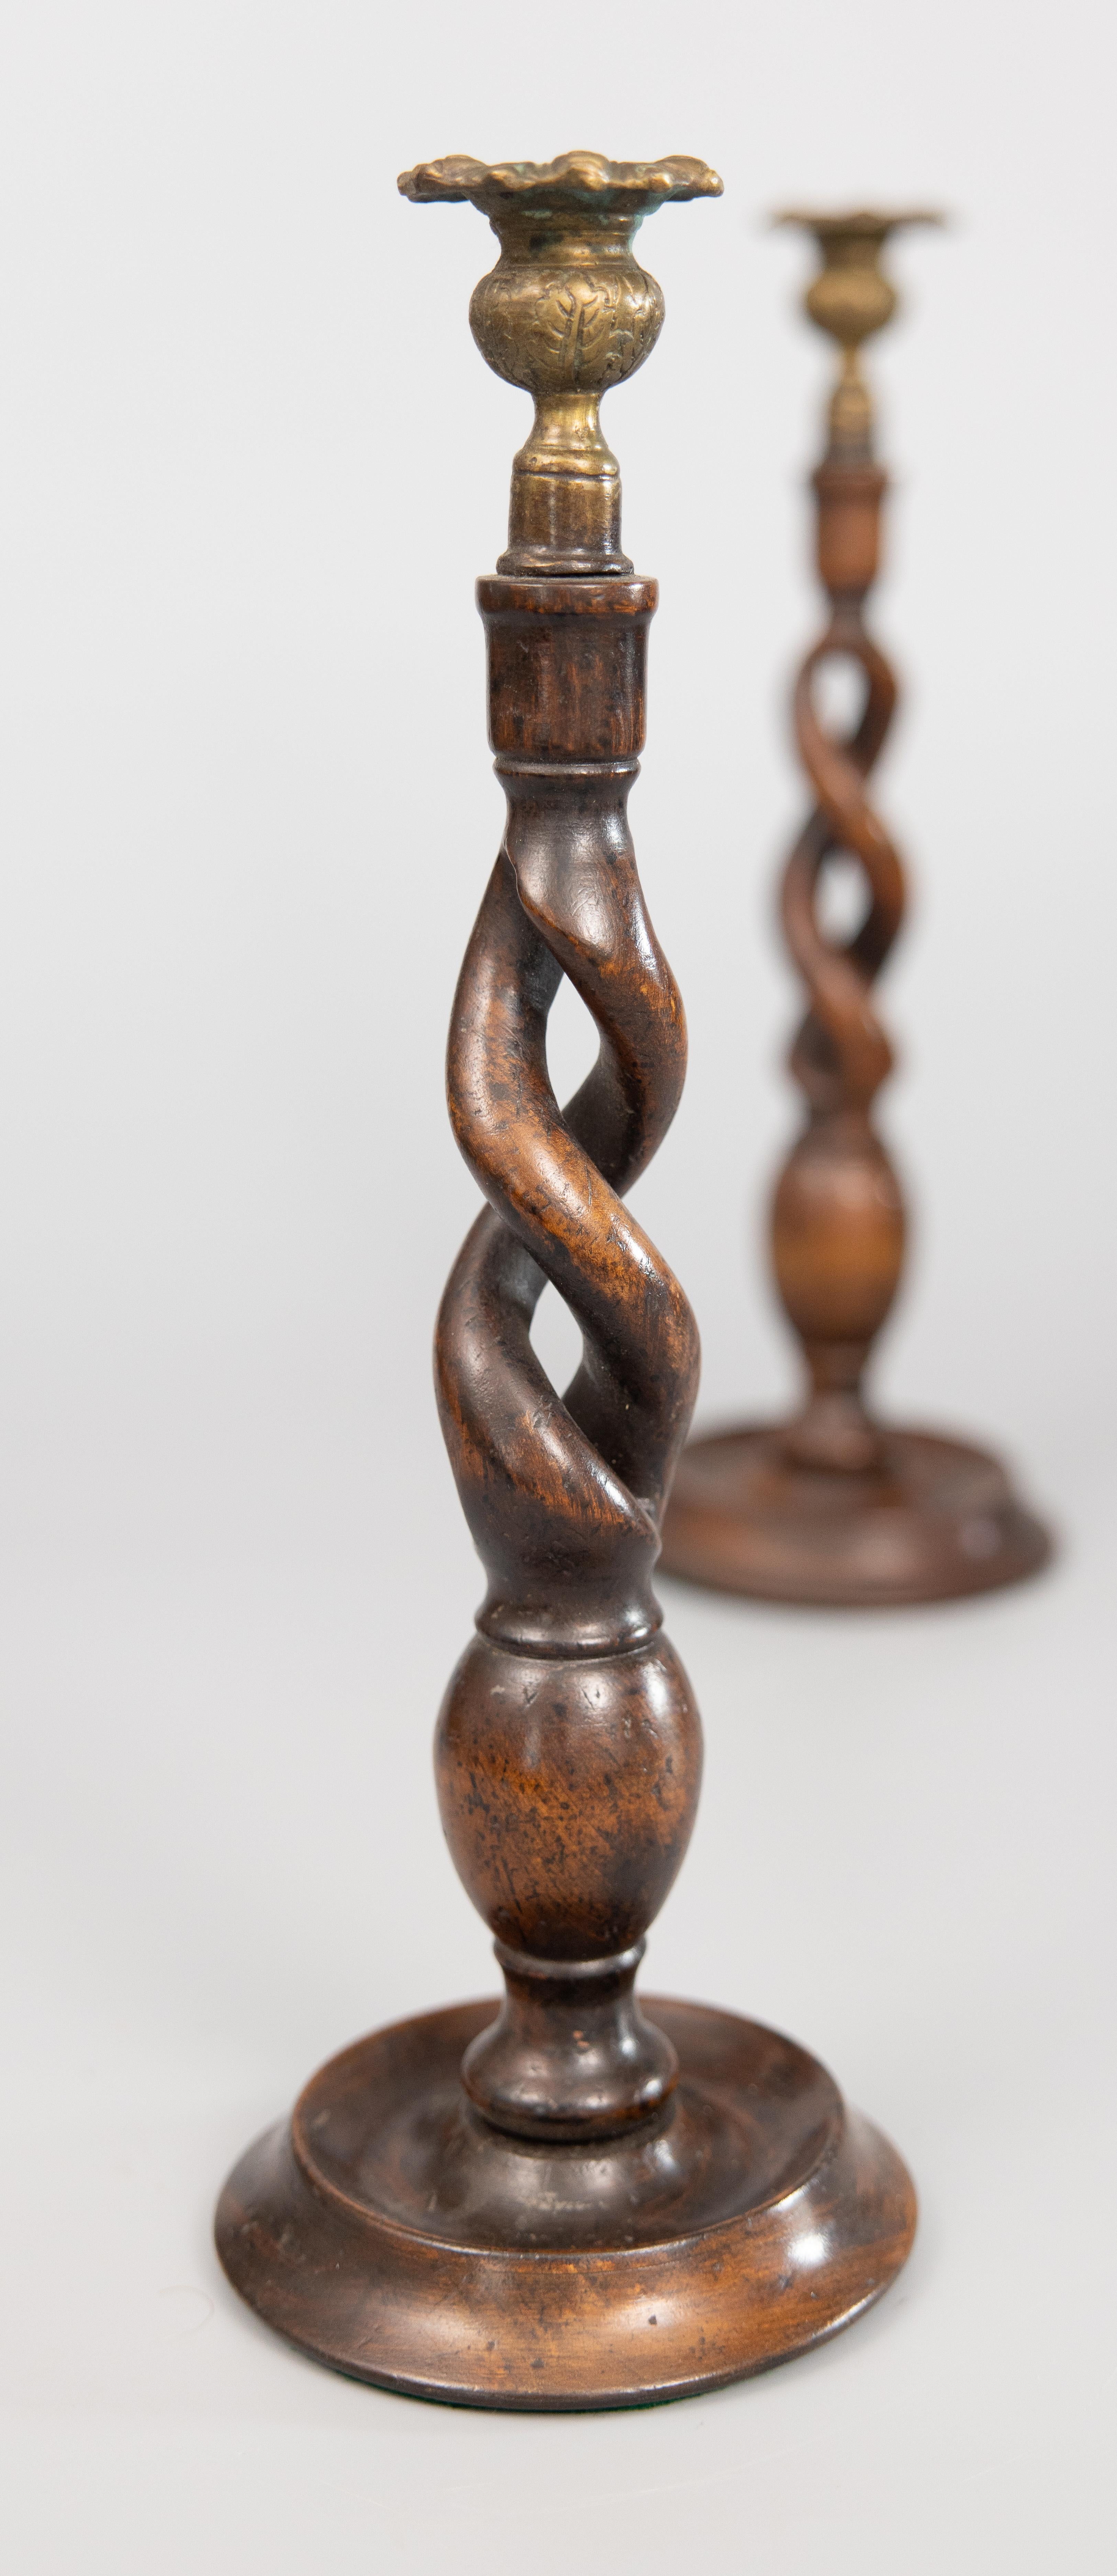 A fine tall pair of English barley twist oak and brass candle holders, circa 1900. This gorgeous pair have hand cast brass thistle top candle cups and hand carved open barley twist stems on hand-turned bases. They would make a stunning addition to a